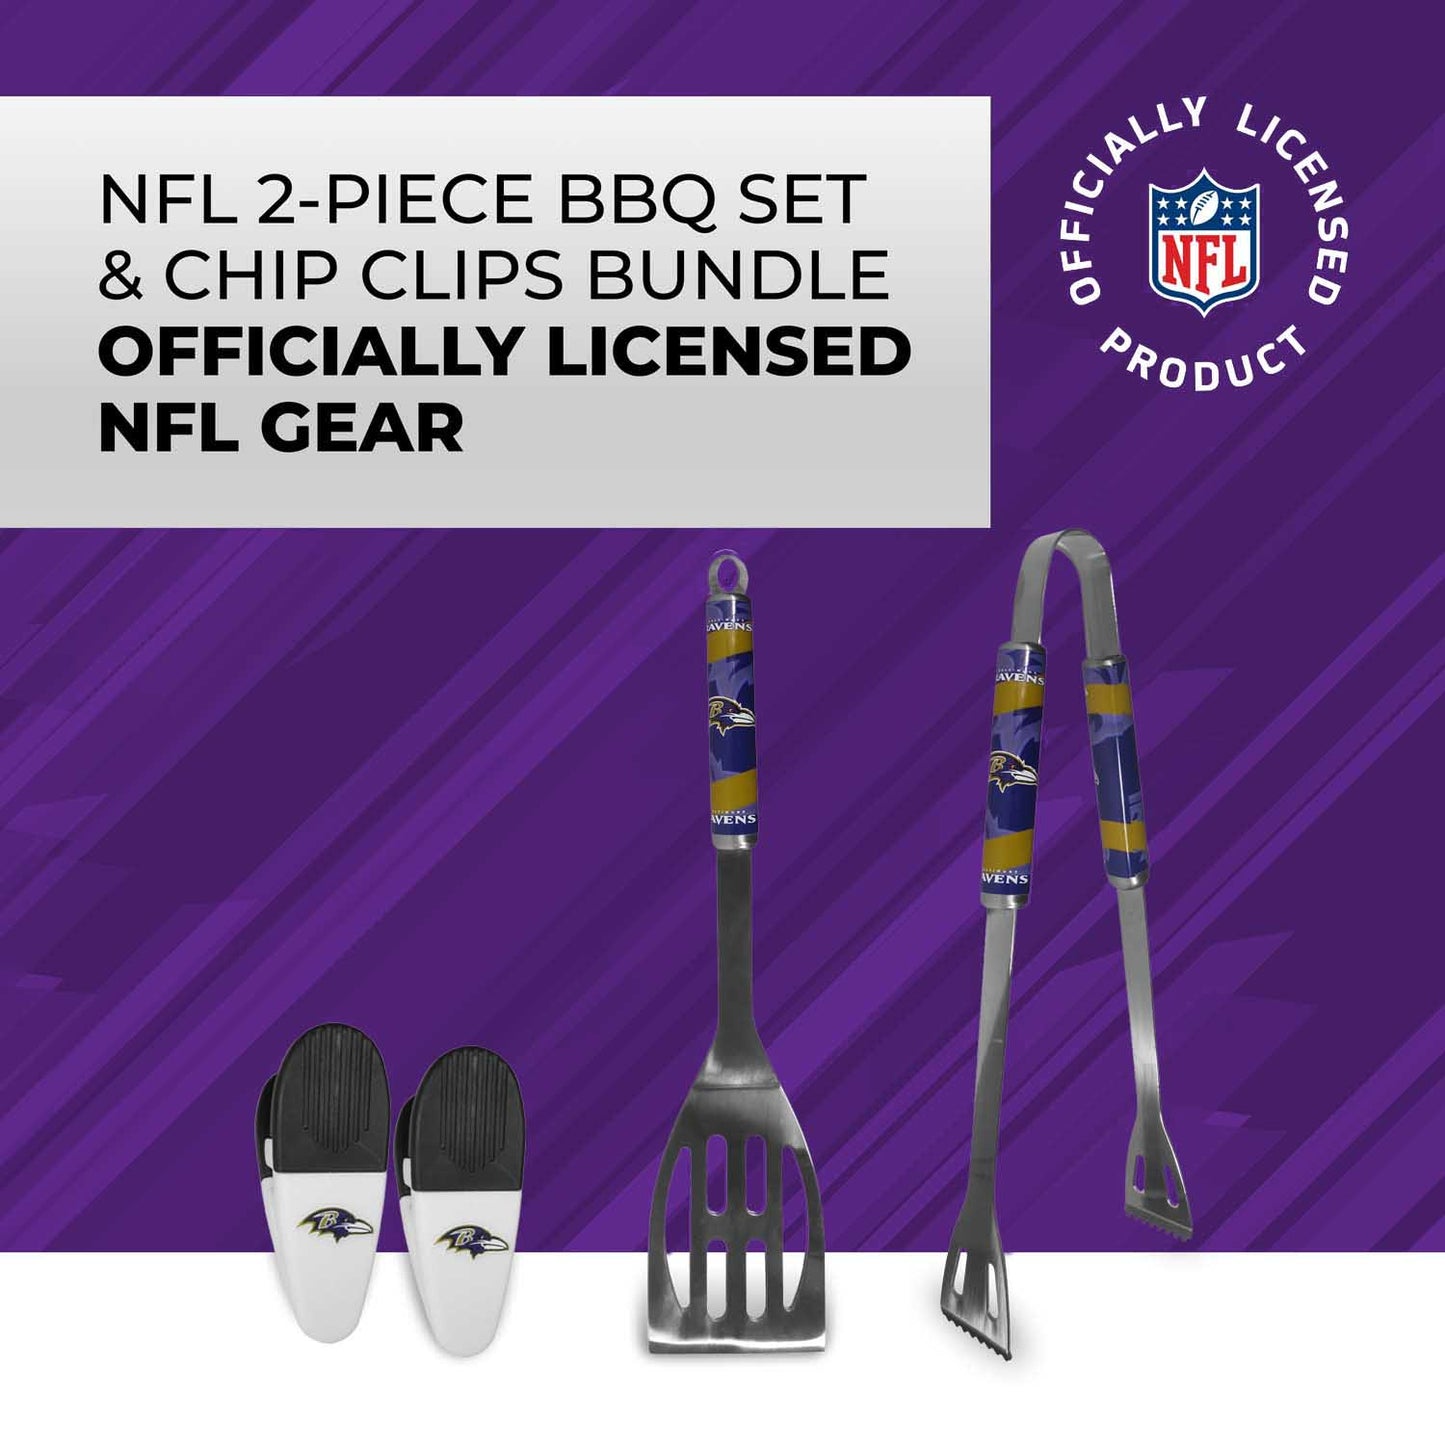 Baltimore Ravens NFL Two Piece Grilling Tools Set with 2 Magnet Chip Clips - Chrome